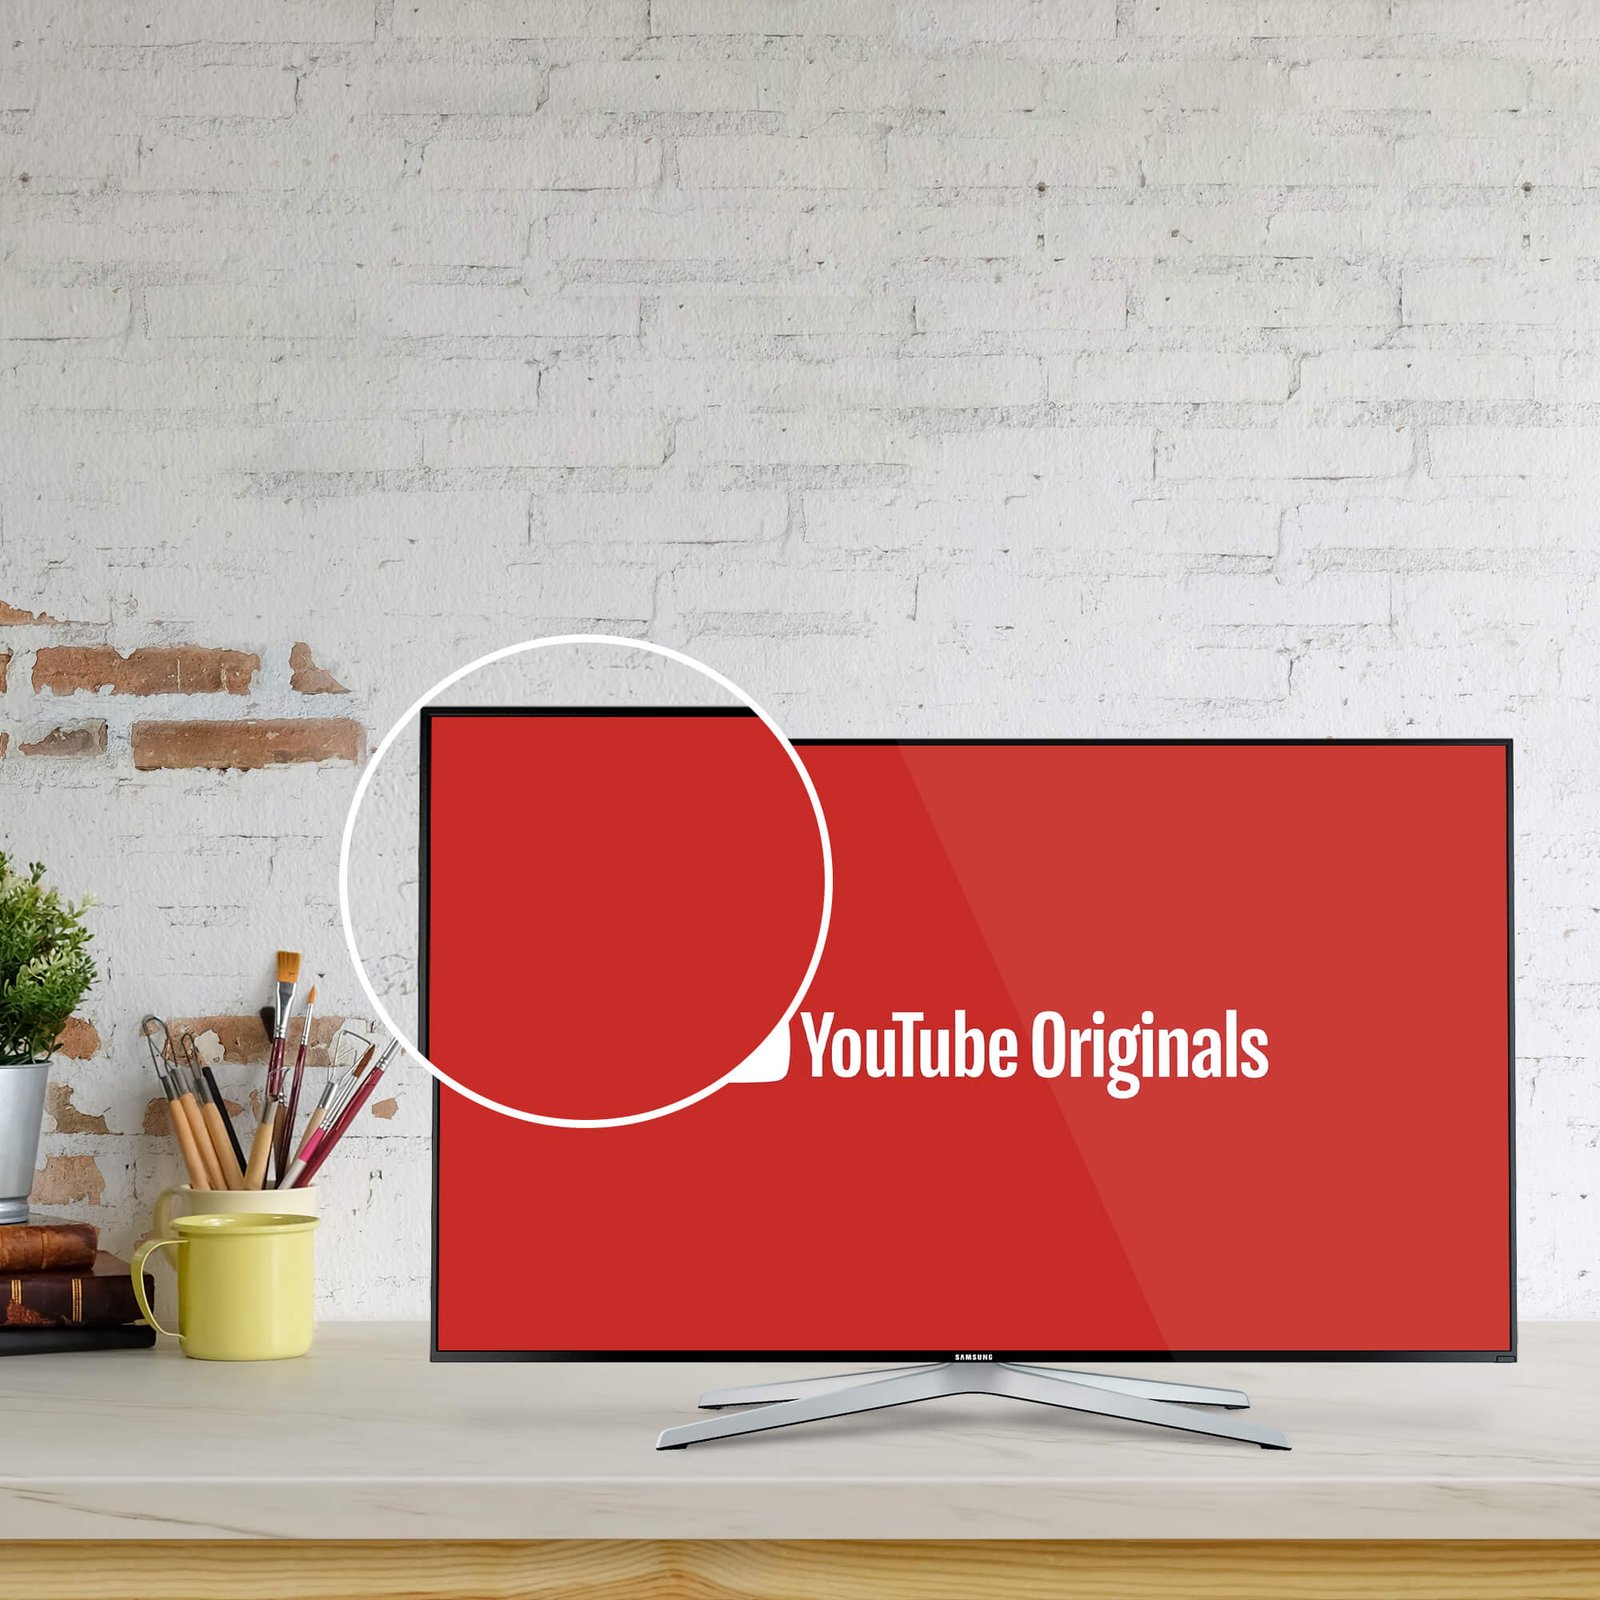 Download Free YouTube Page Mockup PSD Template - Mockup Den